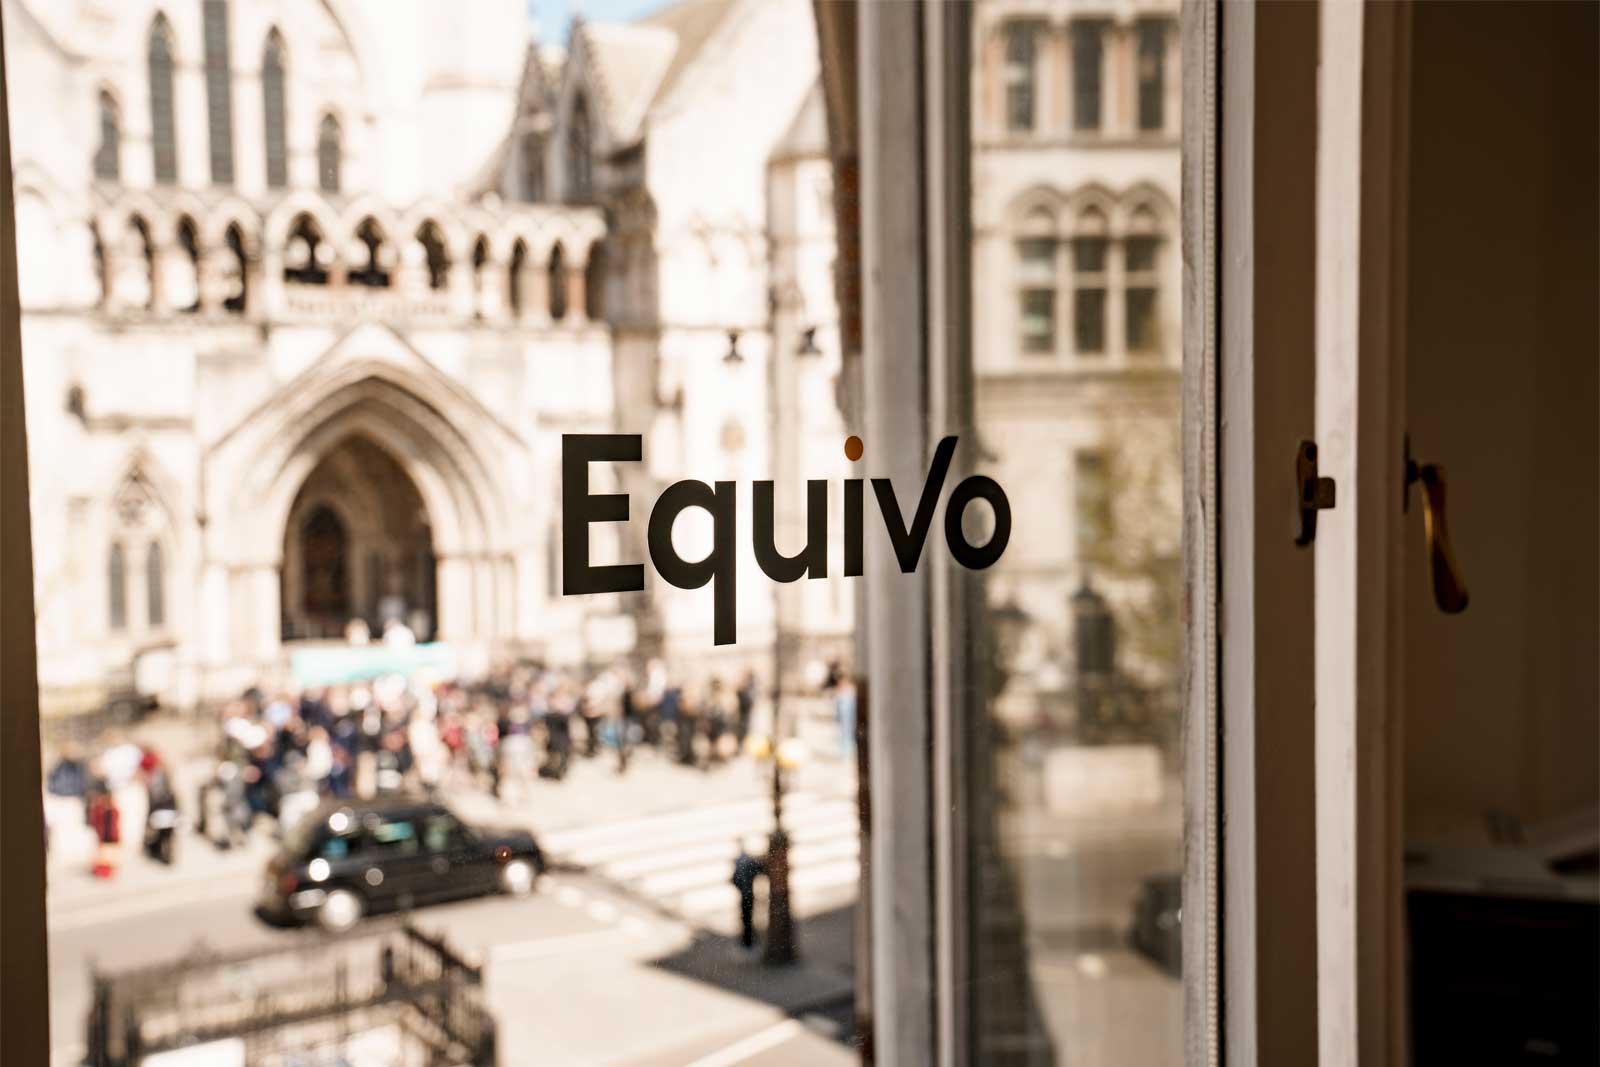 Equivo offices overlooking the High Court, Strand, London.